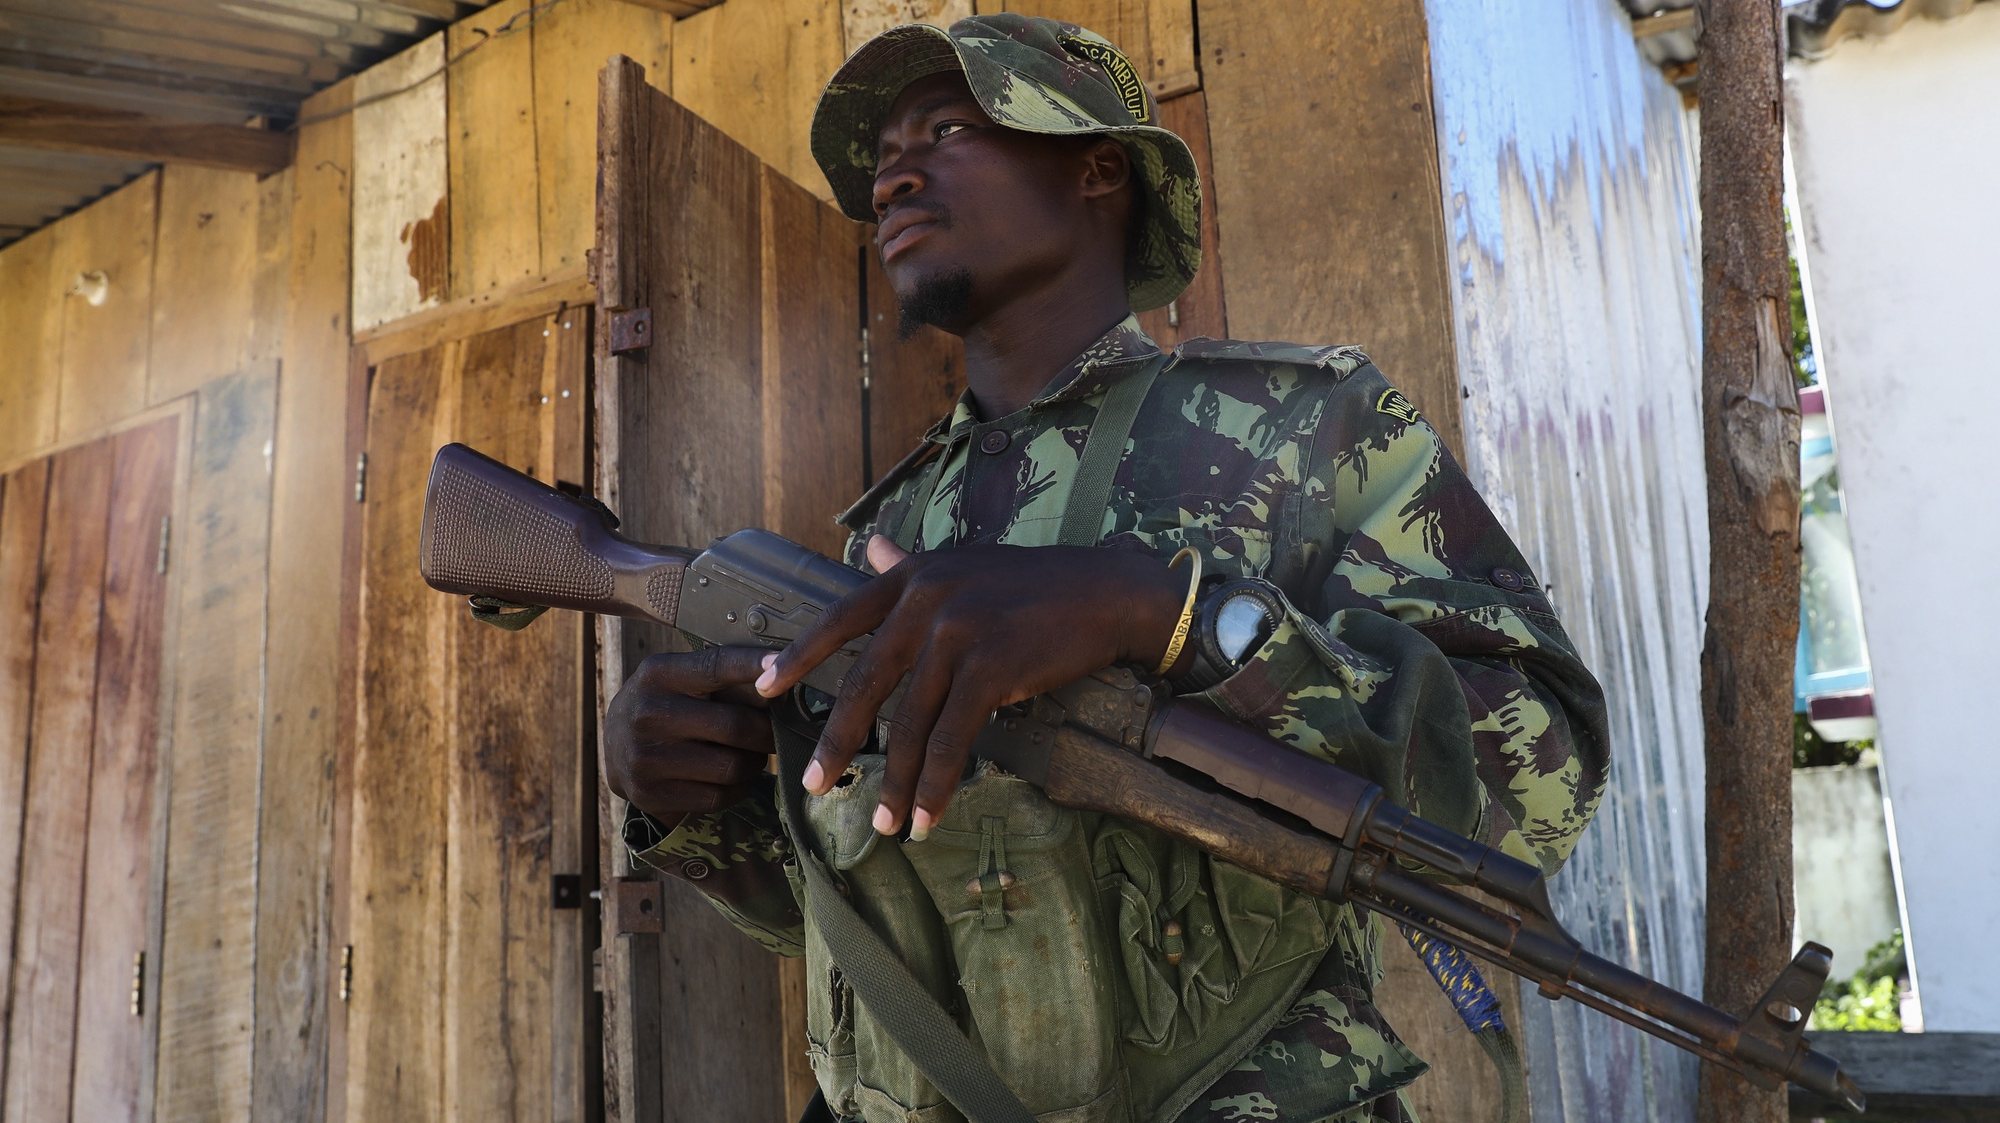 epa09125119 A Mozambique army soldier patrols the streets of Palma, Cabo Delgado, Mozambique, 09 April 2021. The violence unleashed more than three years ago in Cabo Delgado province escalated again about two weeks ago, when armed groups first attacked the town of Palma.  EPA/JOAO RELVAS